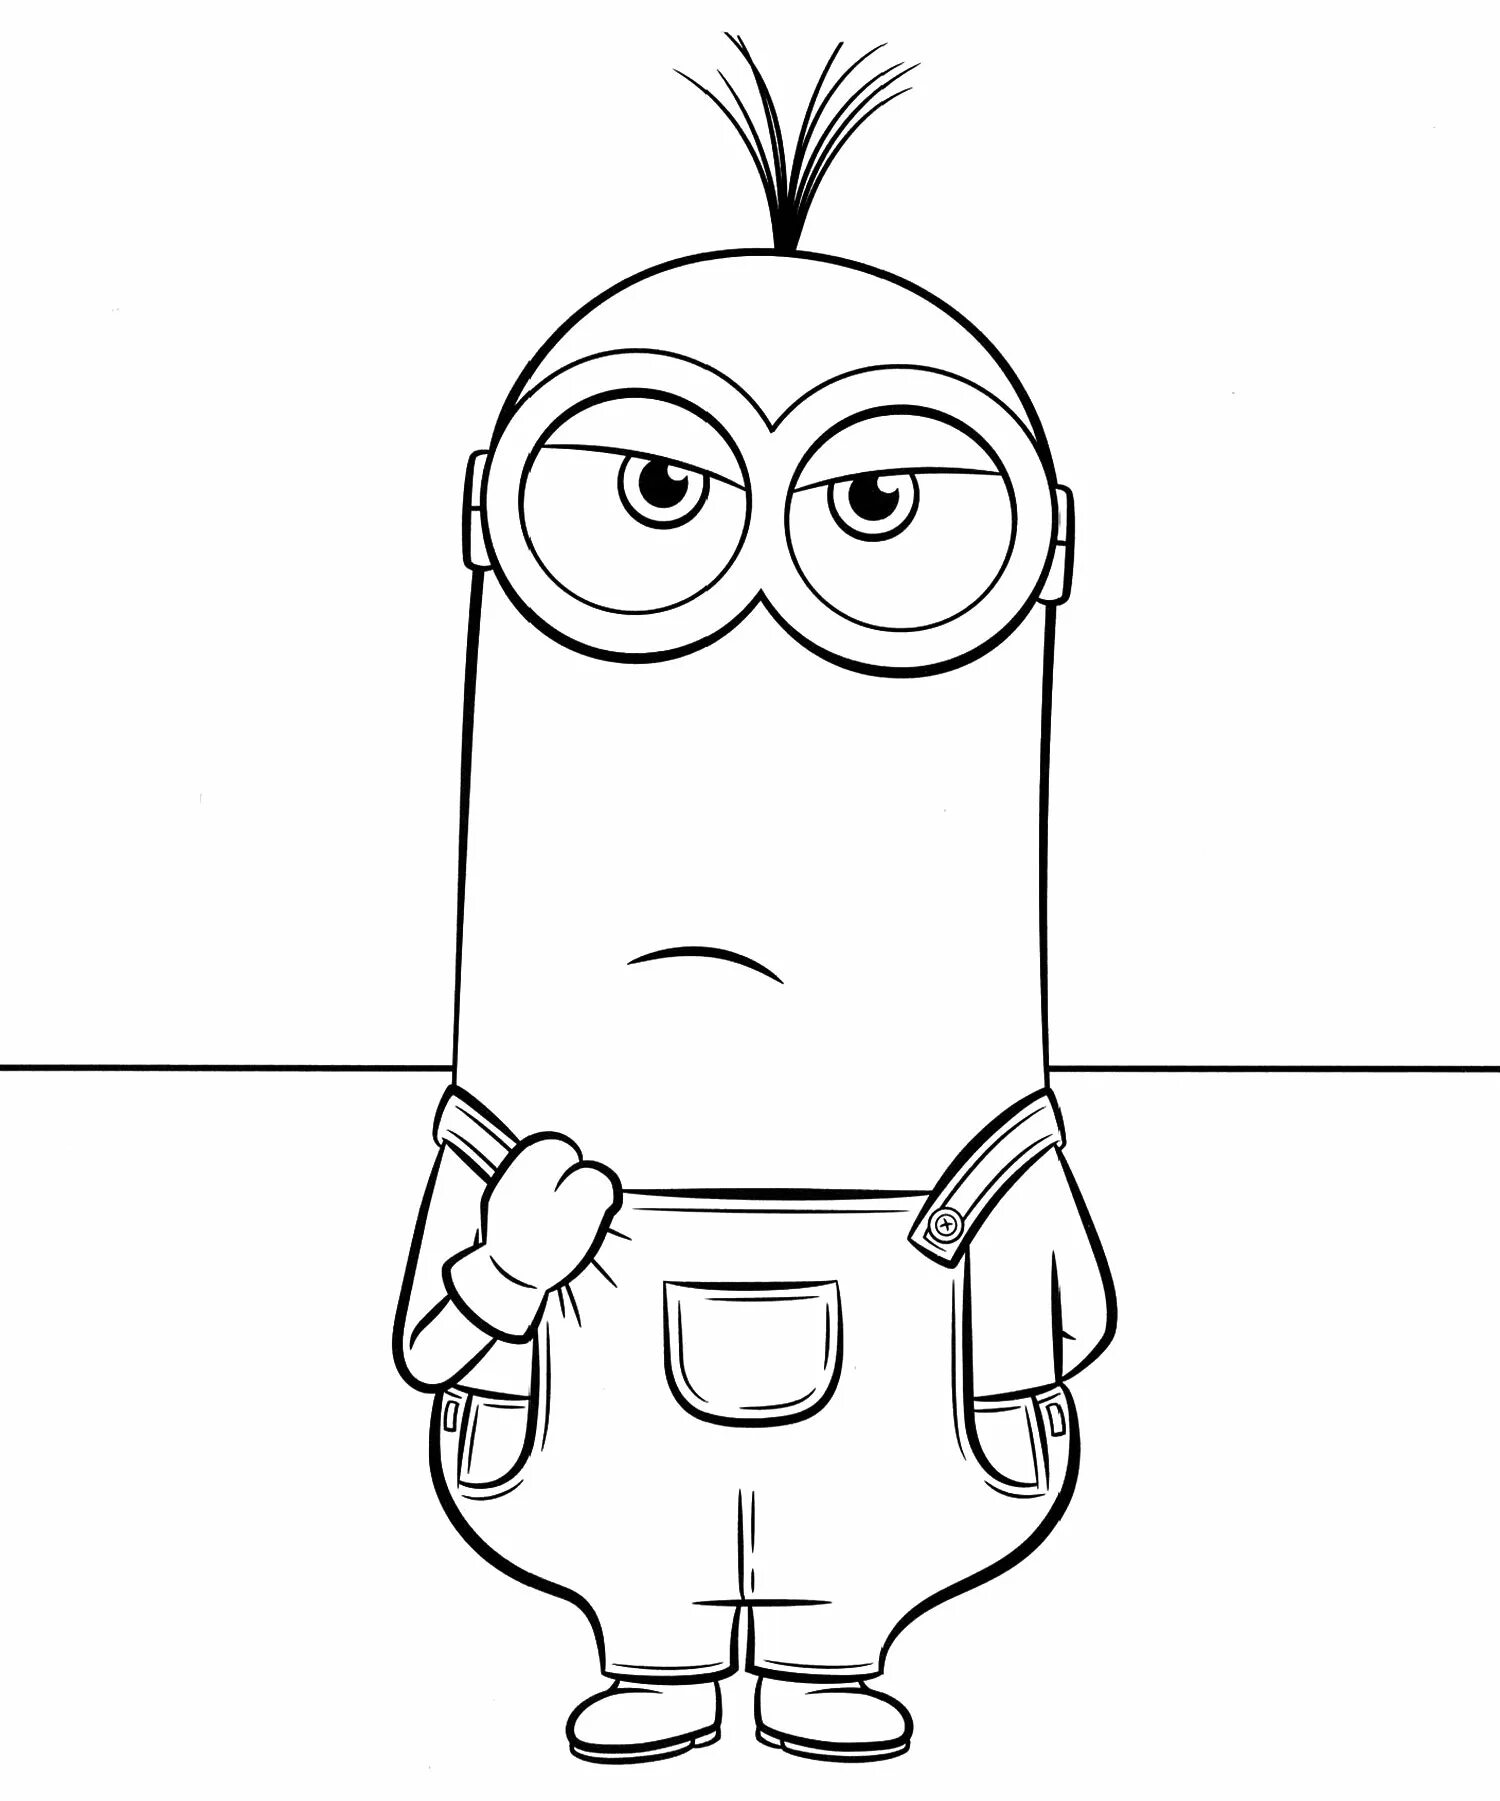 The amazing kevin the minion coloring book